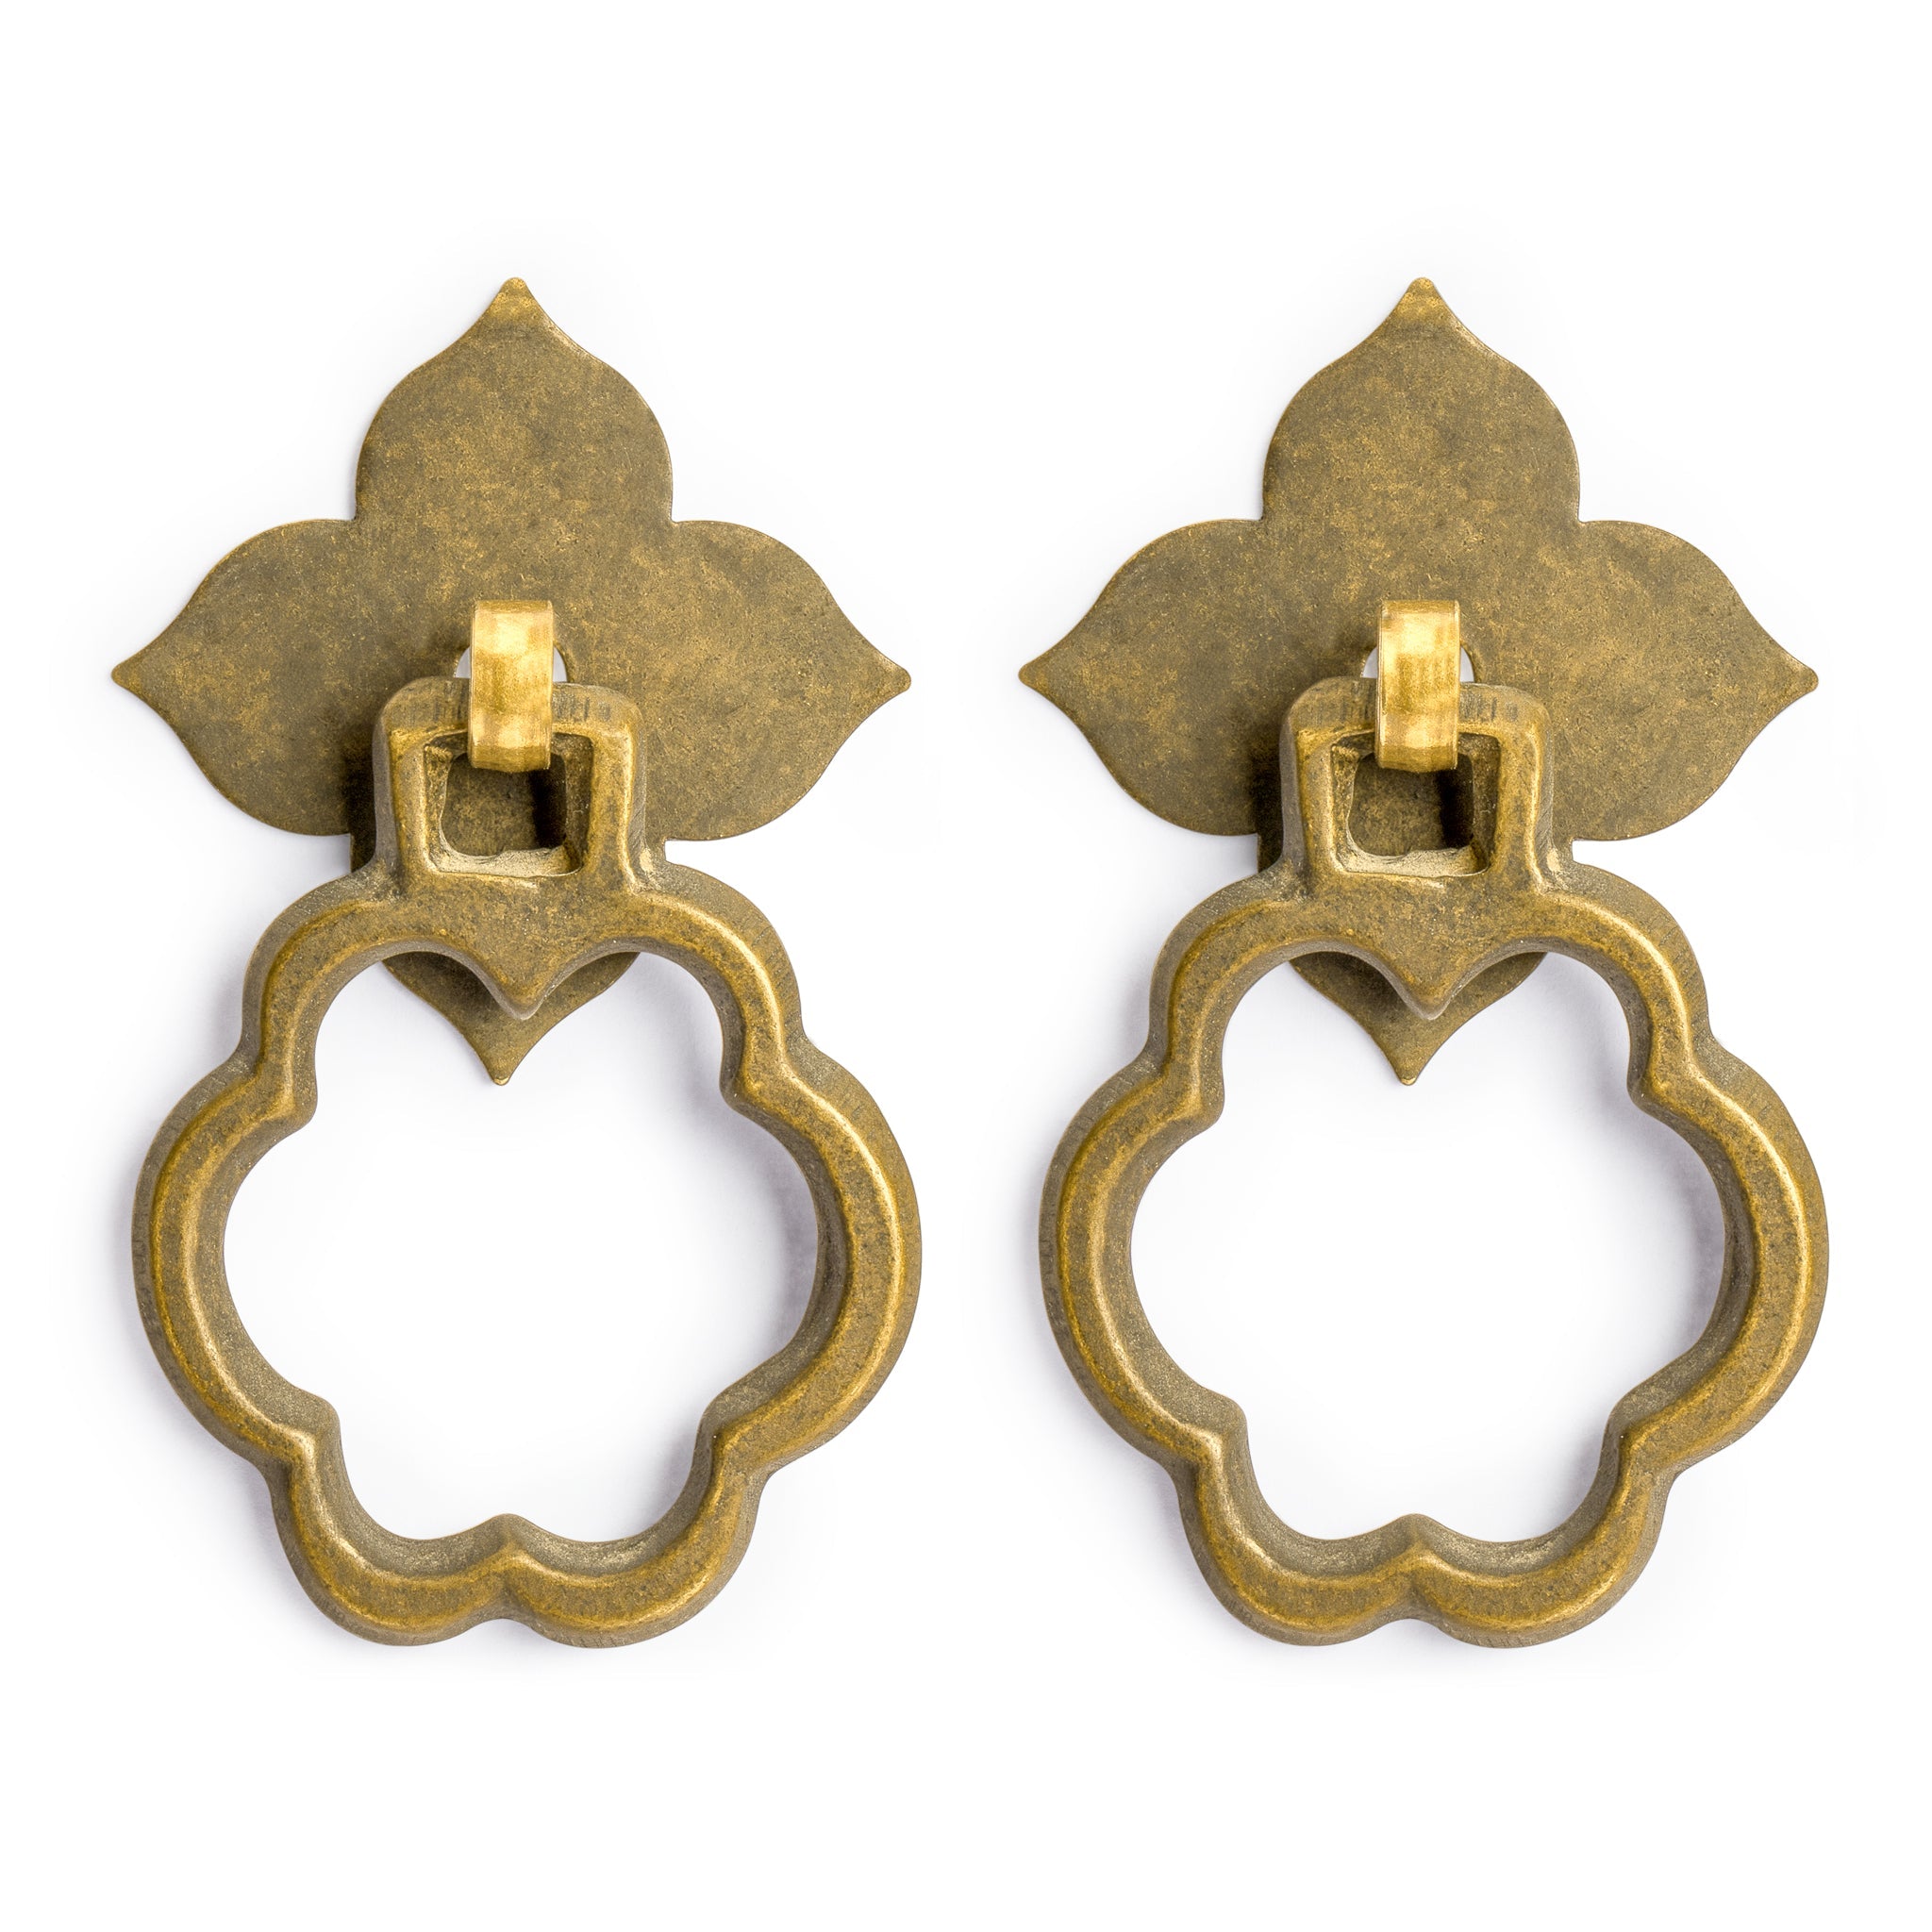 Bunchberry and Clover Flower Pulls 2" - Set of 2-Chinese Brass Hardware